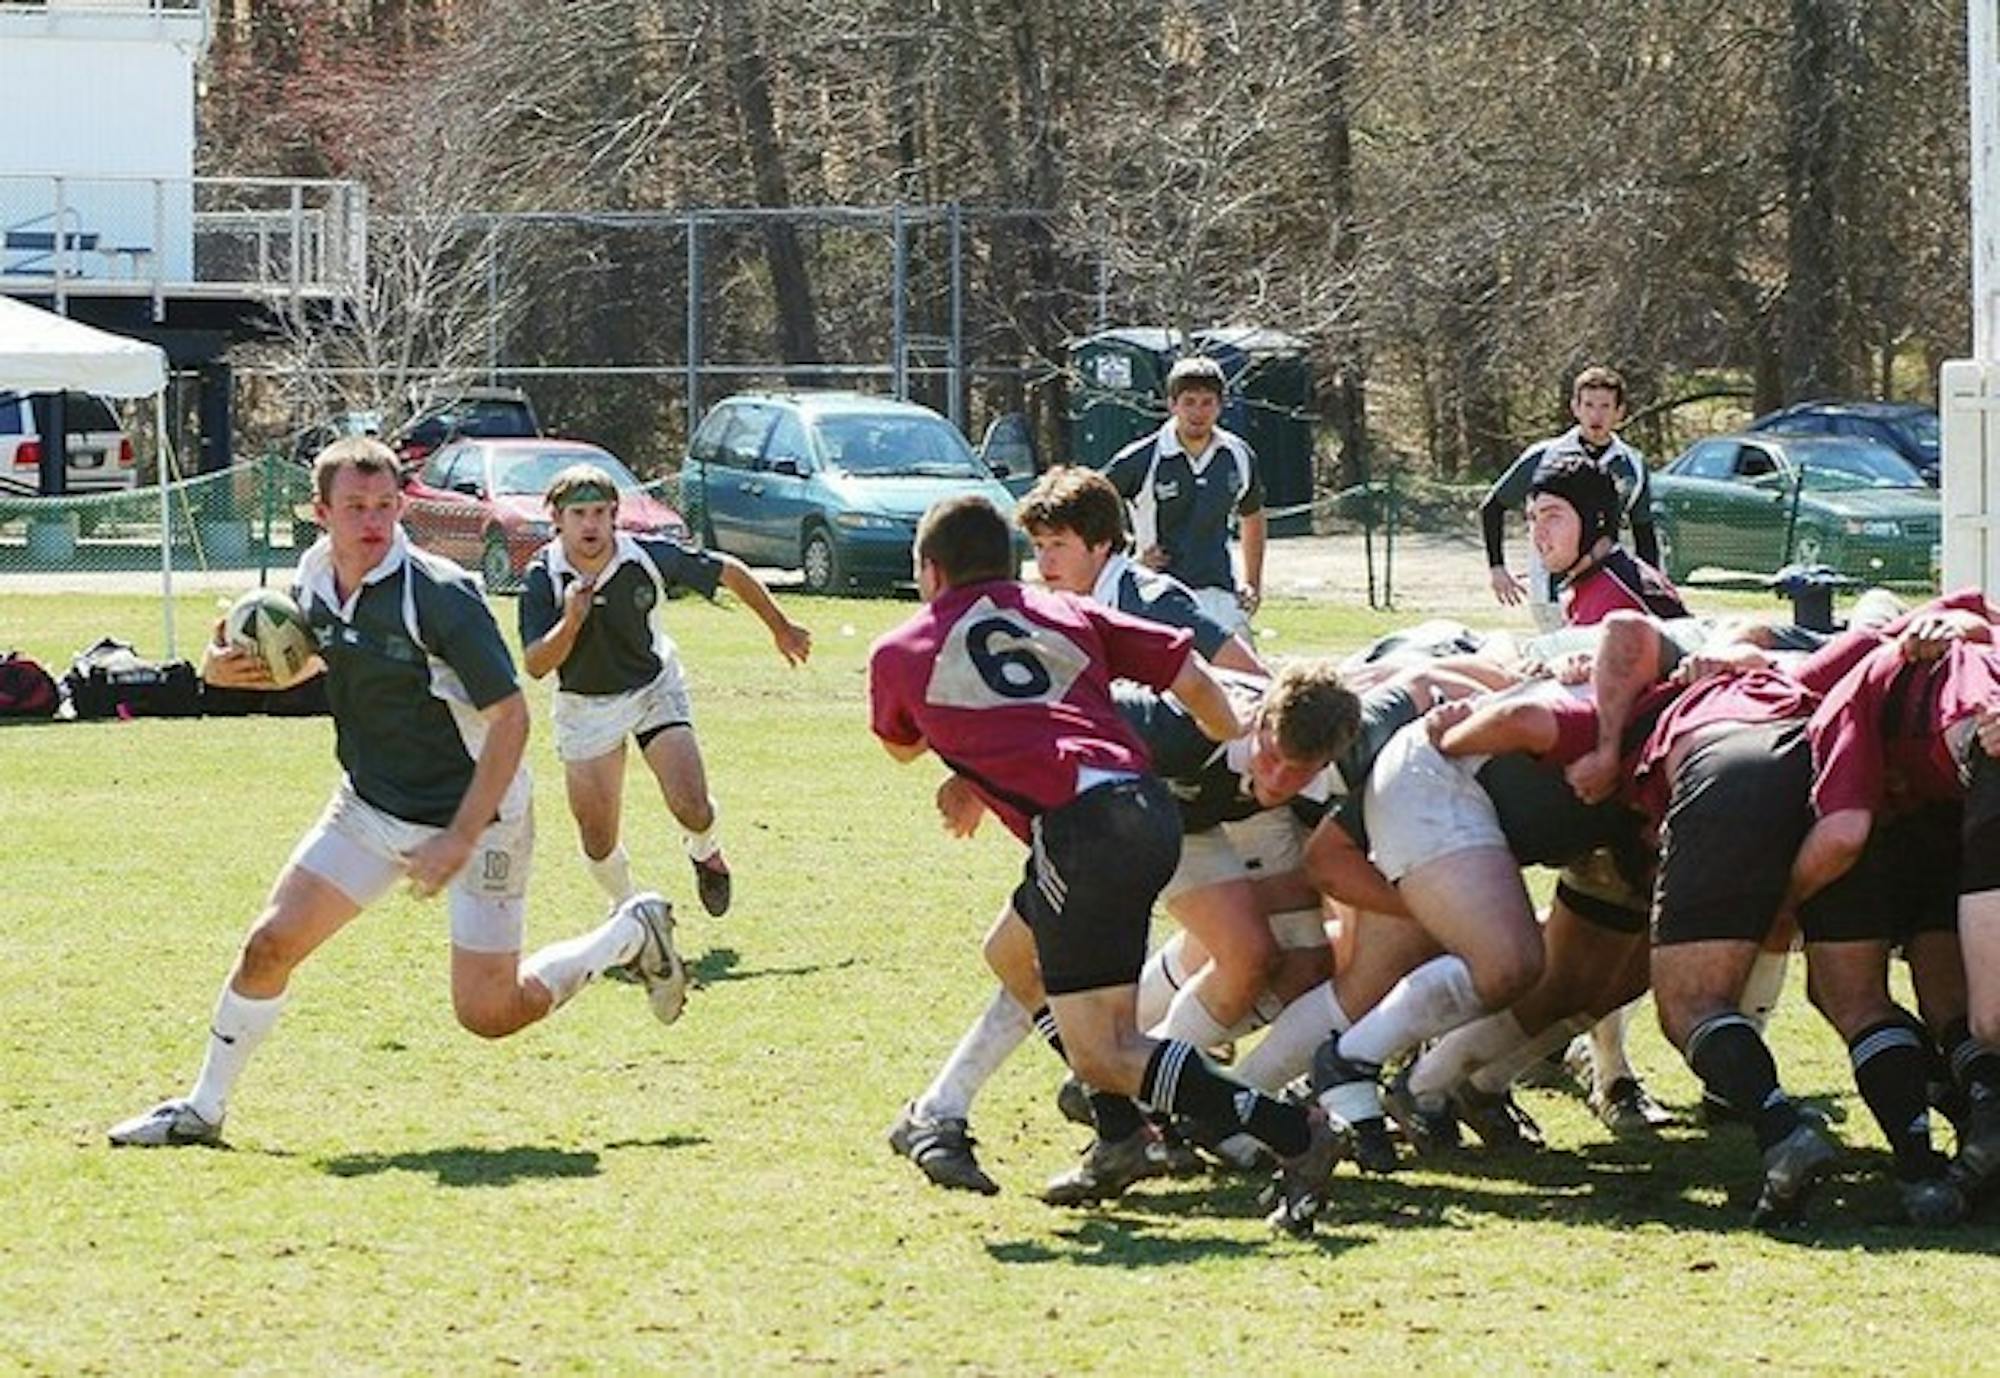 After trouncing Harvard 52-16 Sunday, the Dartmouth Rugby Football Club won the Ivy League championship for the seventh time in nine years.